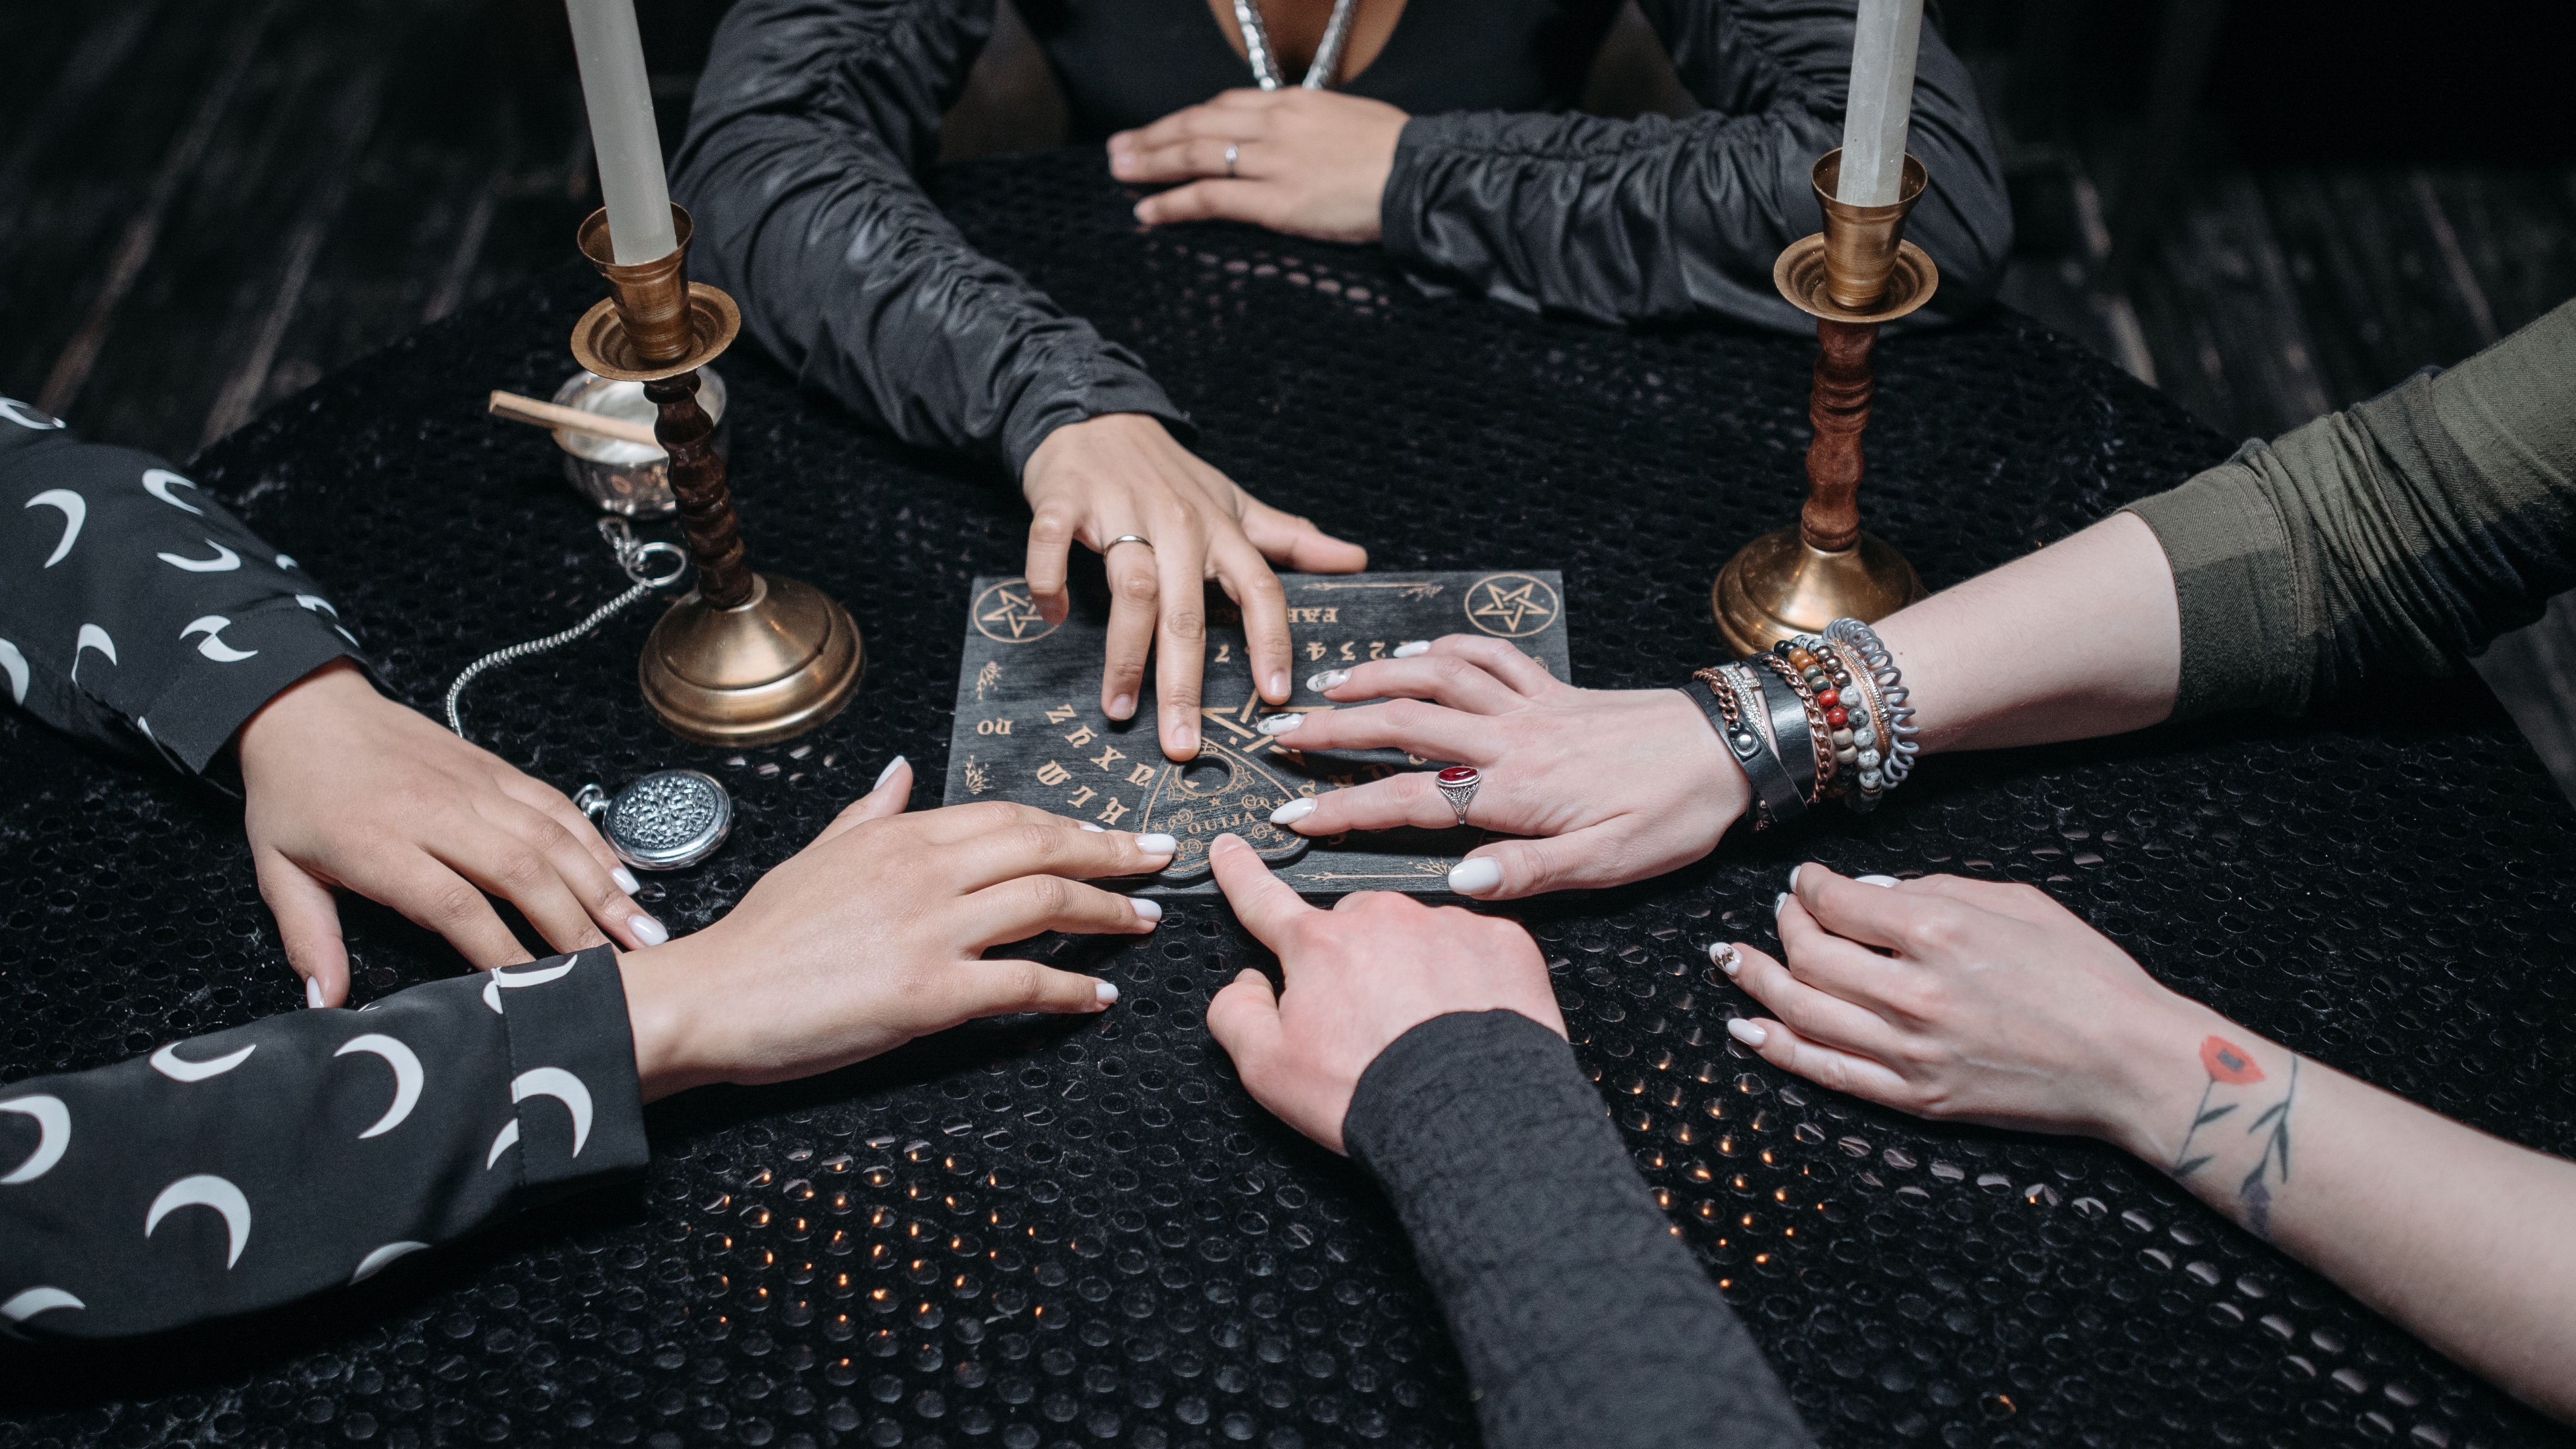 Four friends sitting around a table using a Ouji board. The table has a black table cloth and tall white candles on it.